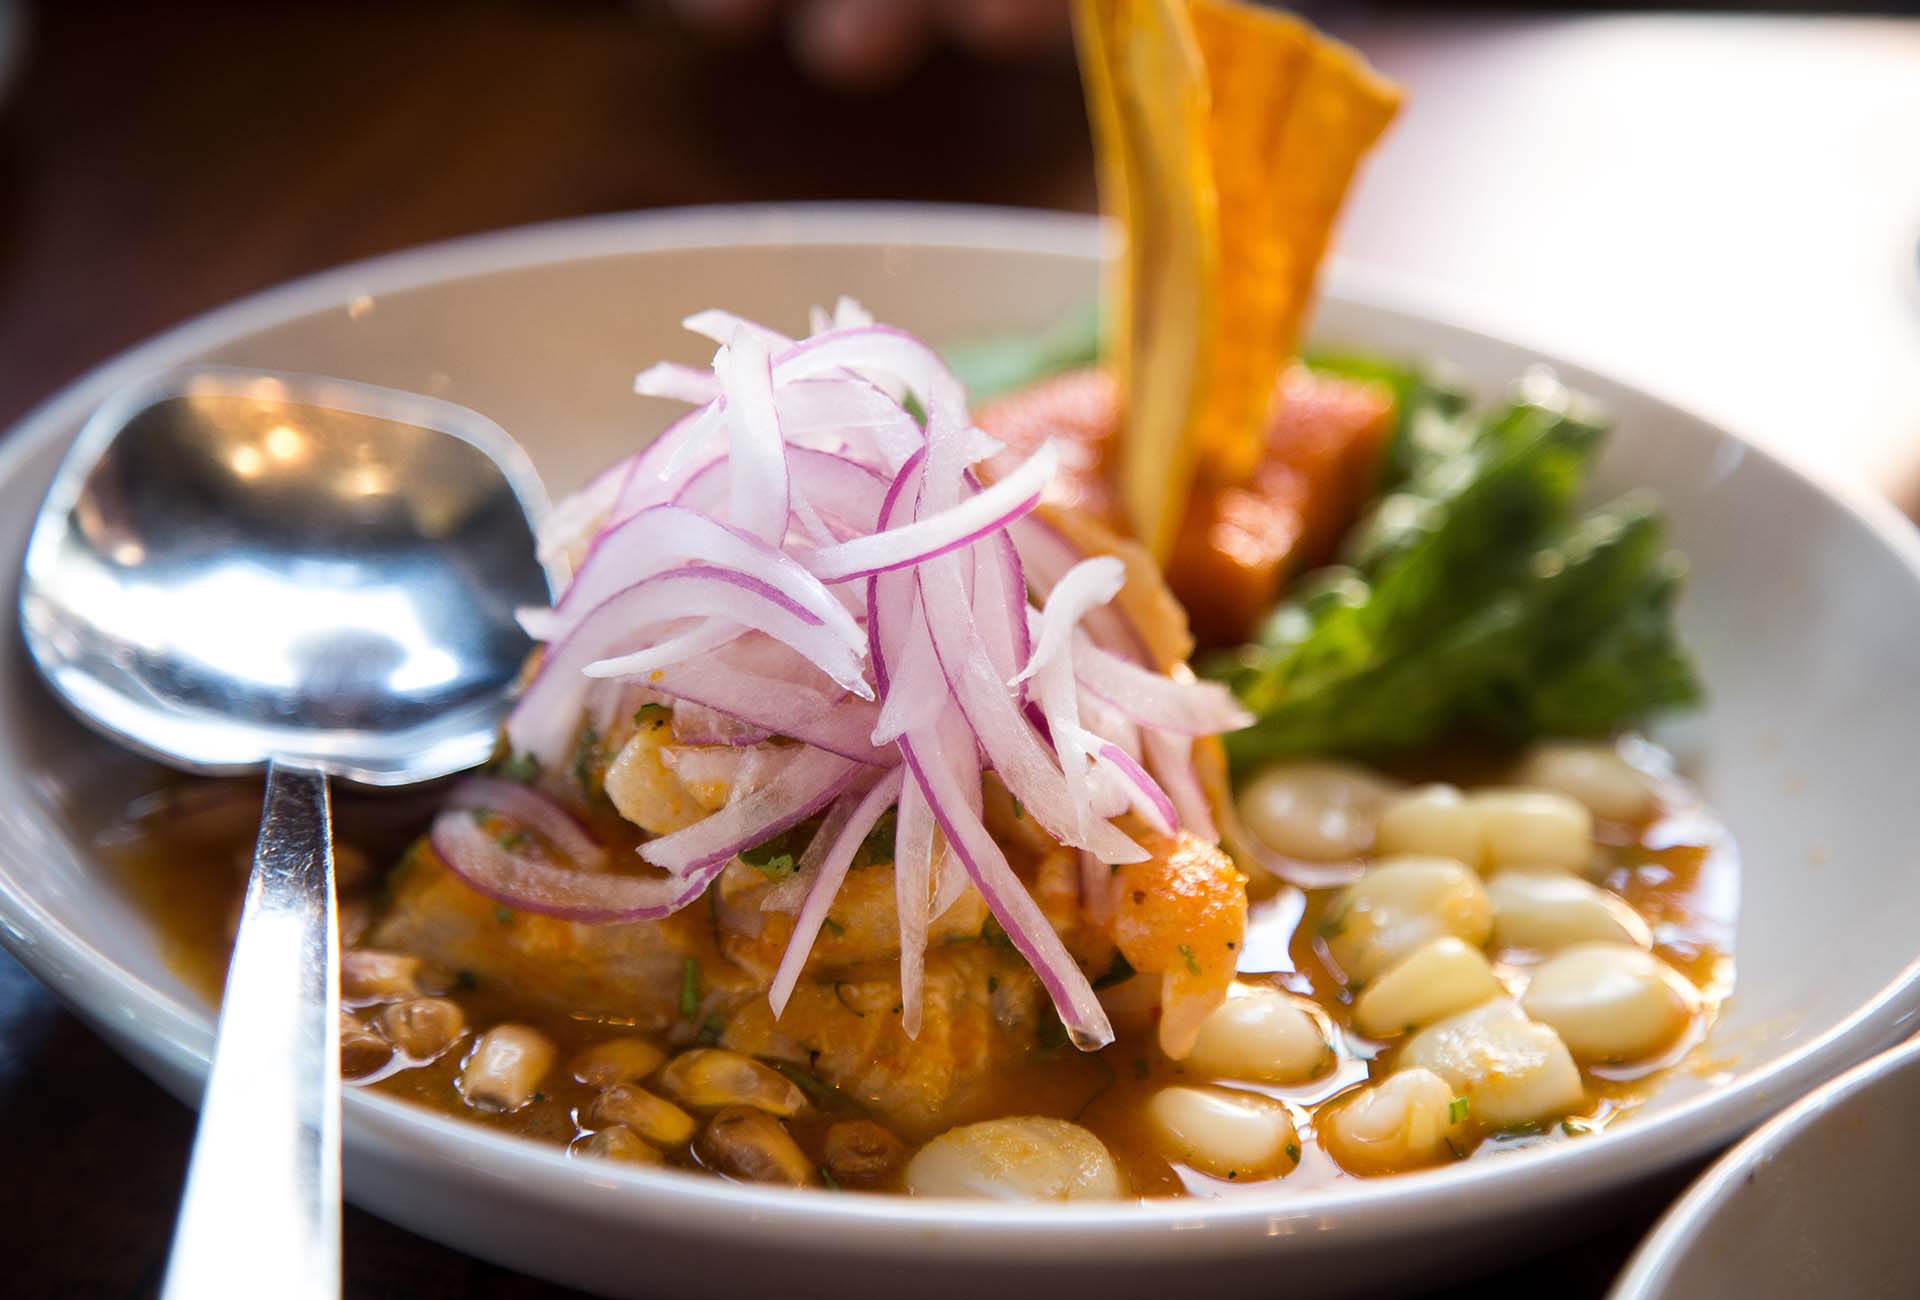 The Cebiche Pescado uses the daily catch of fish that is locally sourced from the Bay